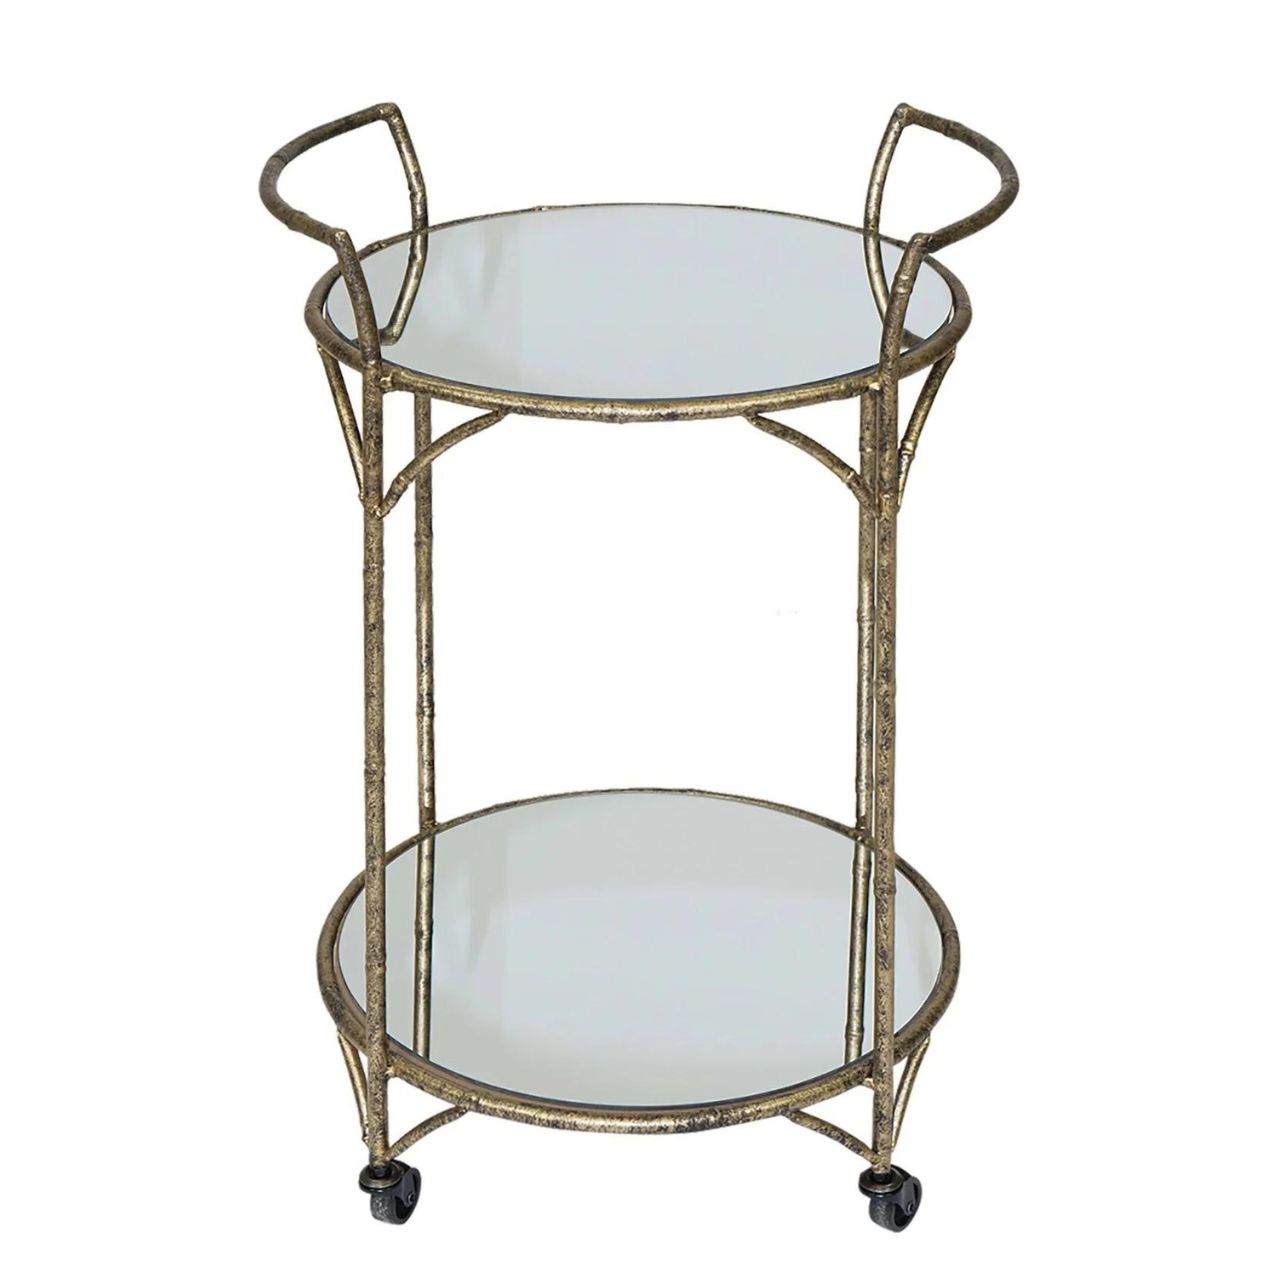 Danrich Drinks Trolley by Mindy Brownes  - Mindy Brownes Drinks Trolley - Sip Sip Hooray, - Introducing the Danrich drinks trolley for smaller spaces. - Make your dinner party one to remember and a service as easy as one-two-three! - Featuring one mirrored top and one mirrored bottom shelf.